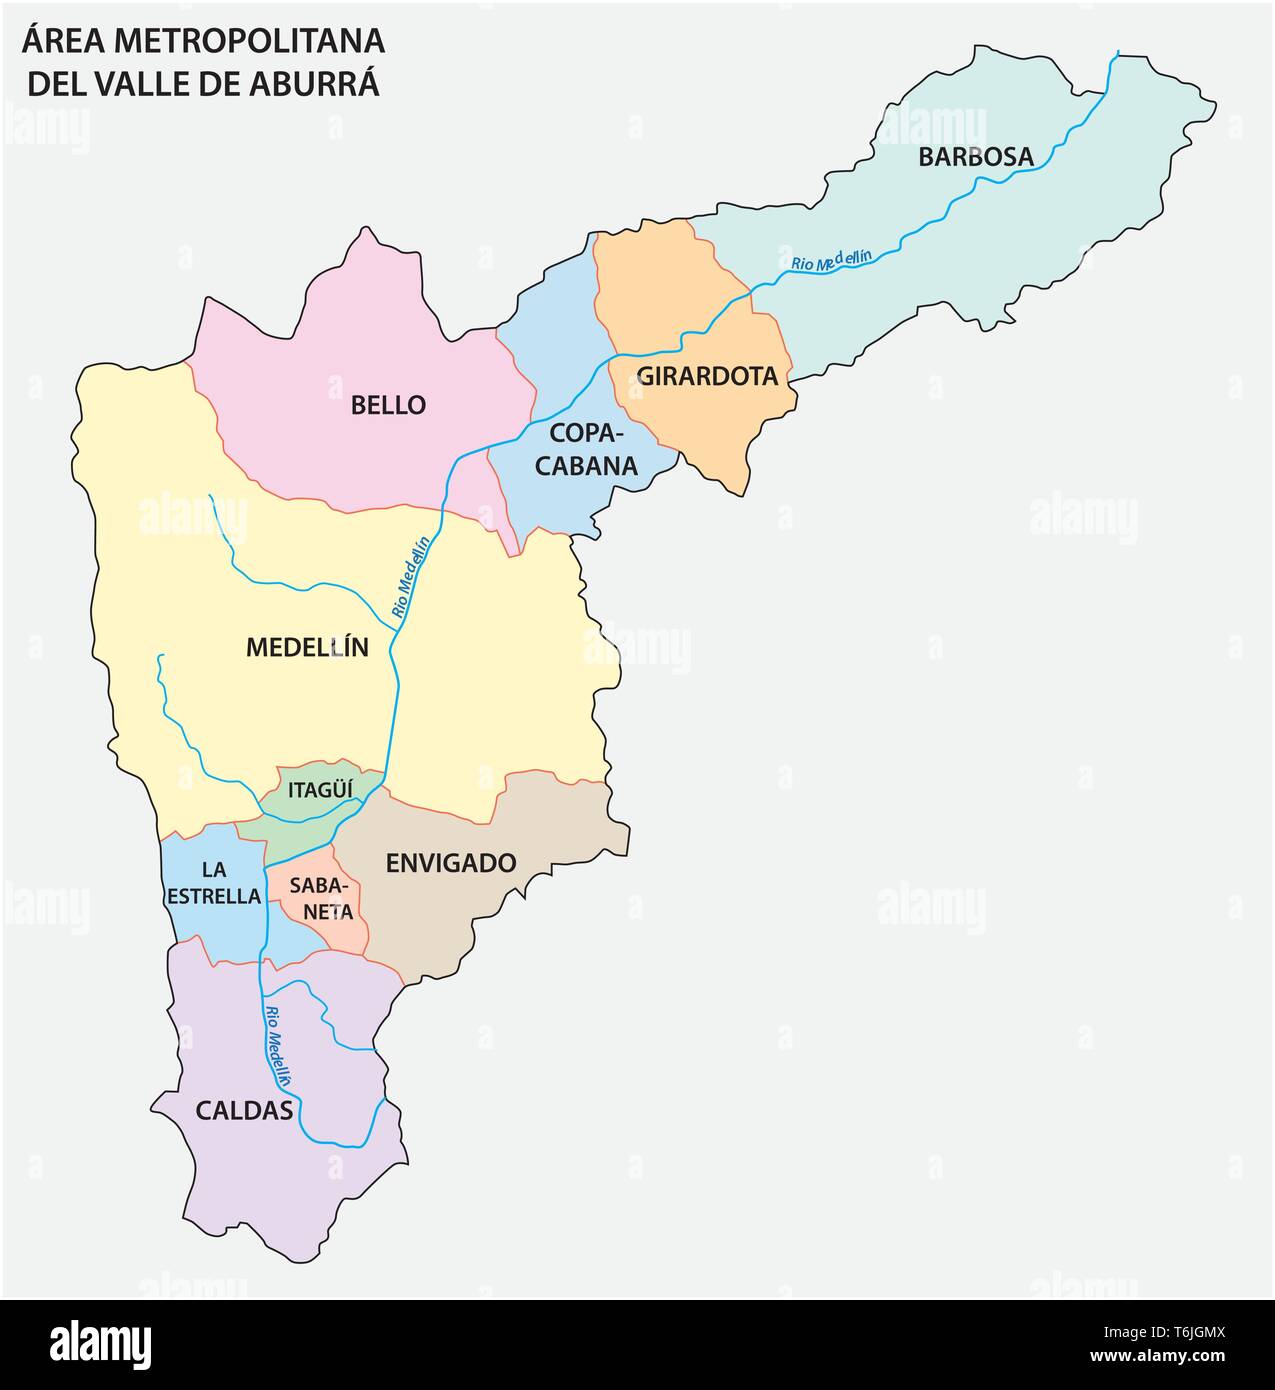 Administrative and political map of the Colombian Metropolitan Area of the Aburra Valley Stock Vector